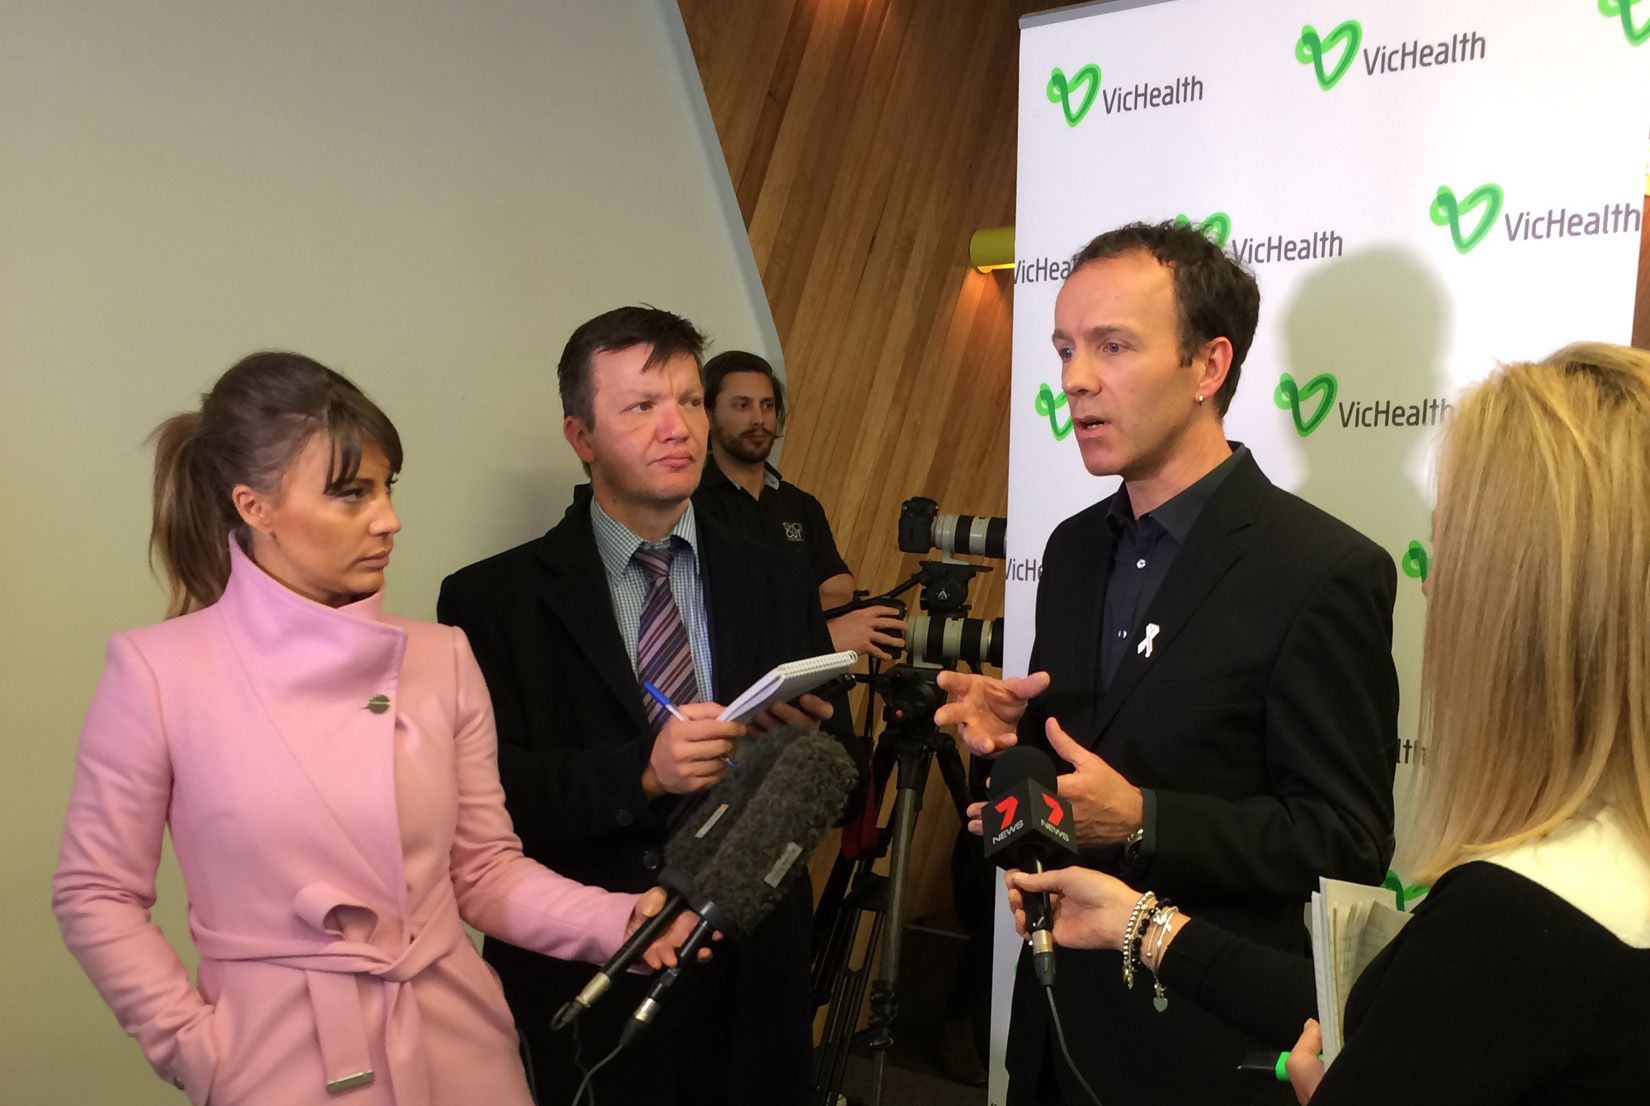 Professor Michael Flood responding to the media at the National Community Attitudes Survey launch, 2014